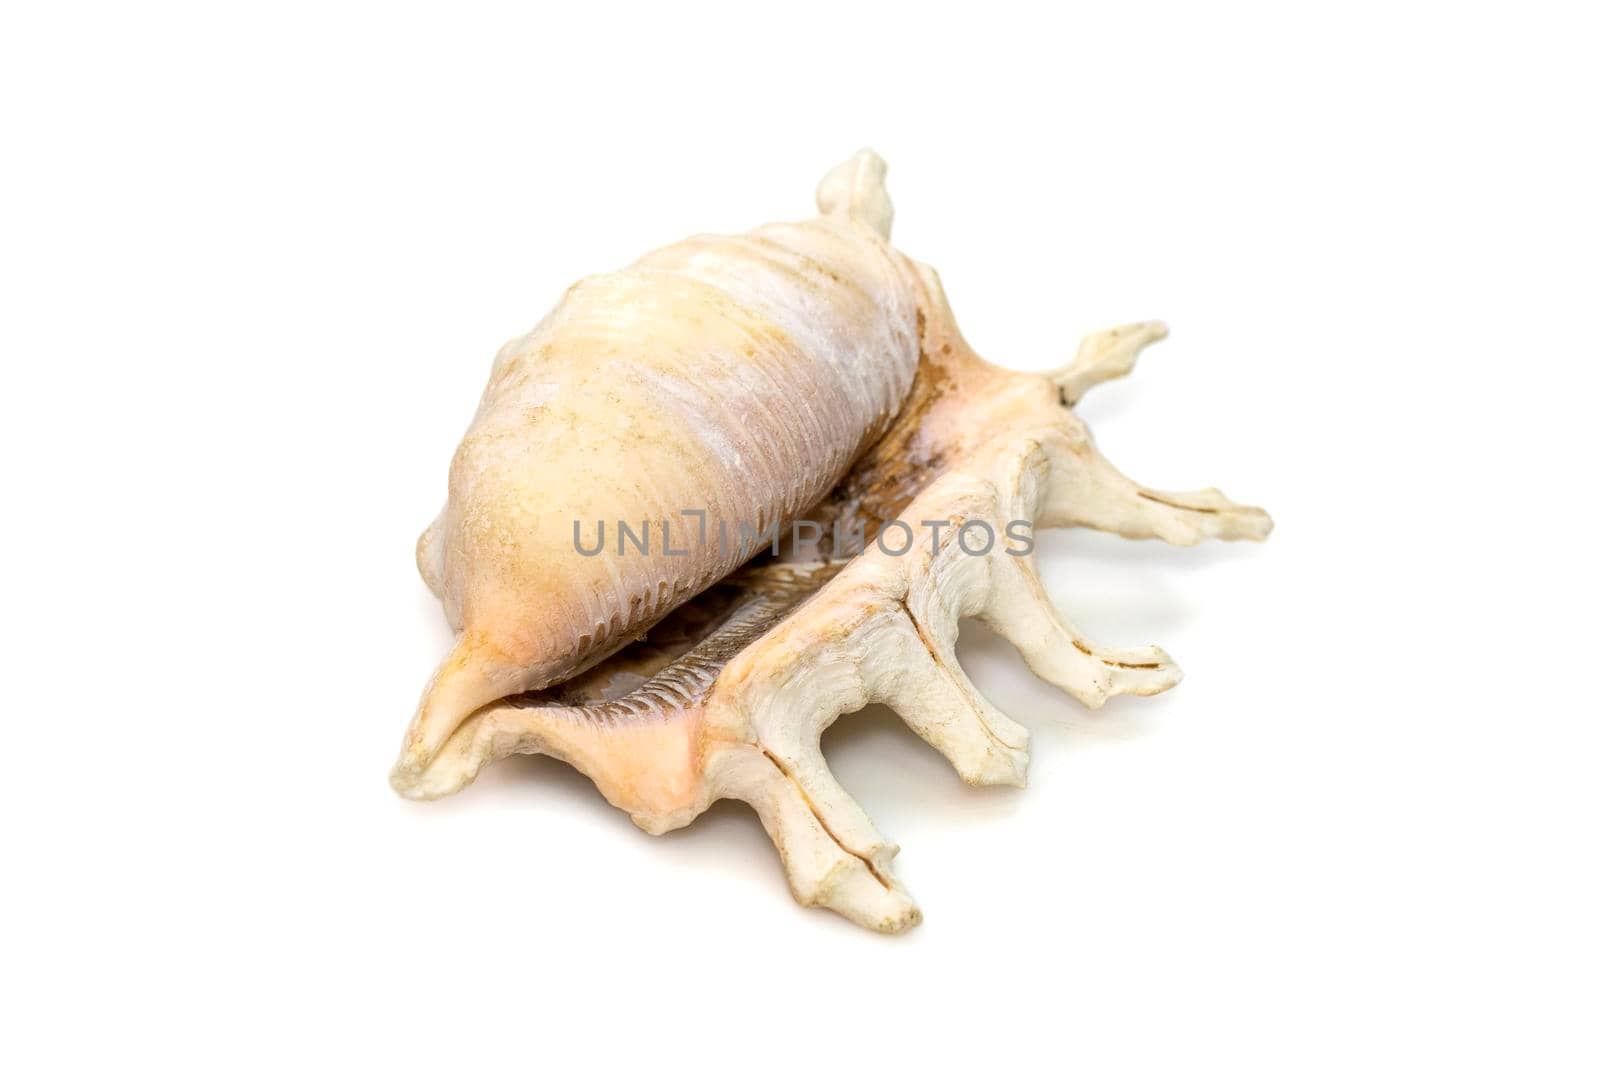 Image of lambis scorpius sea shell, common name the scorpion conch or scorpion spider conch, is a species of large sea snail, a marine gastropod mollusk in the family Strombidae, the true conchs on a white background. Undersea Animals. by yod67